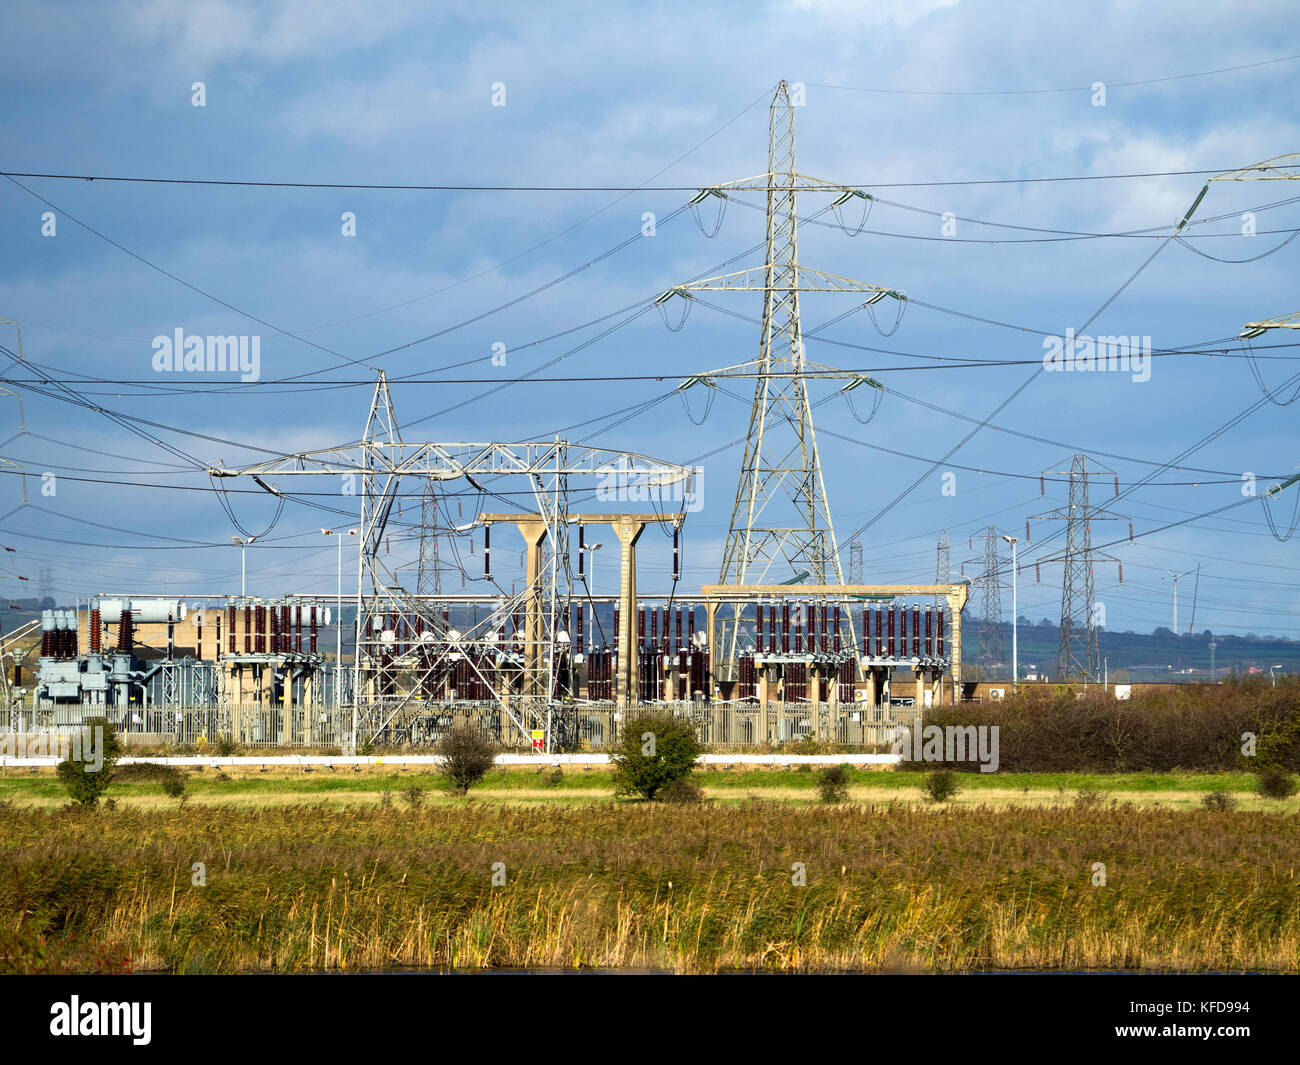 A National Grid  electrical switching sub-station on the 400kV overhead power transmission system with pylons for lines in several directions Stock Photo